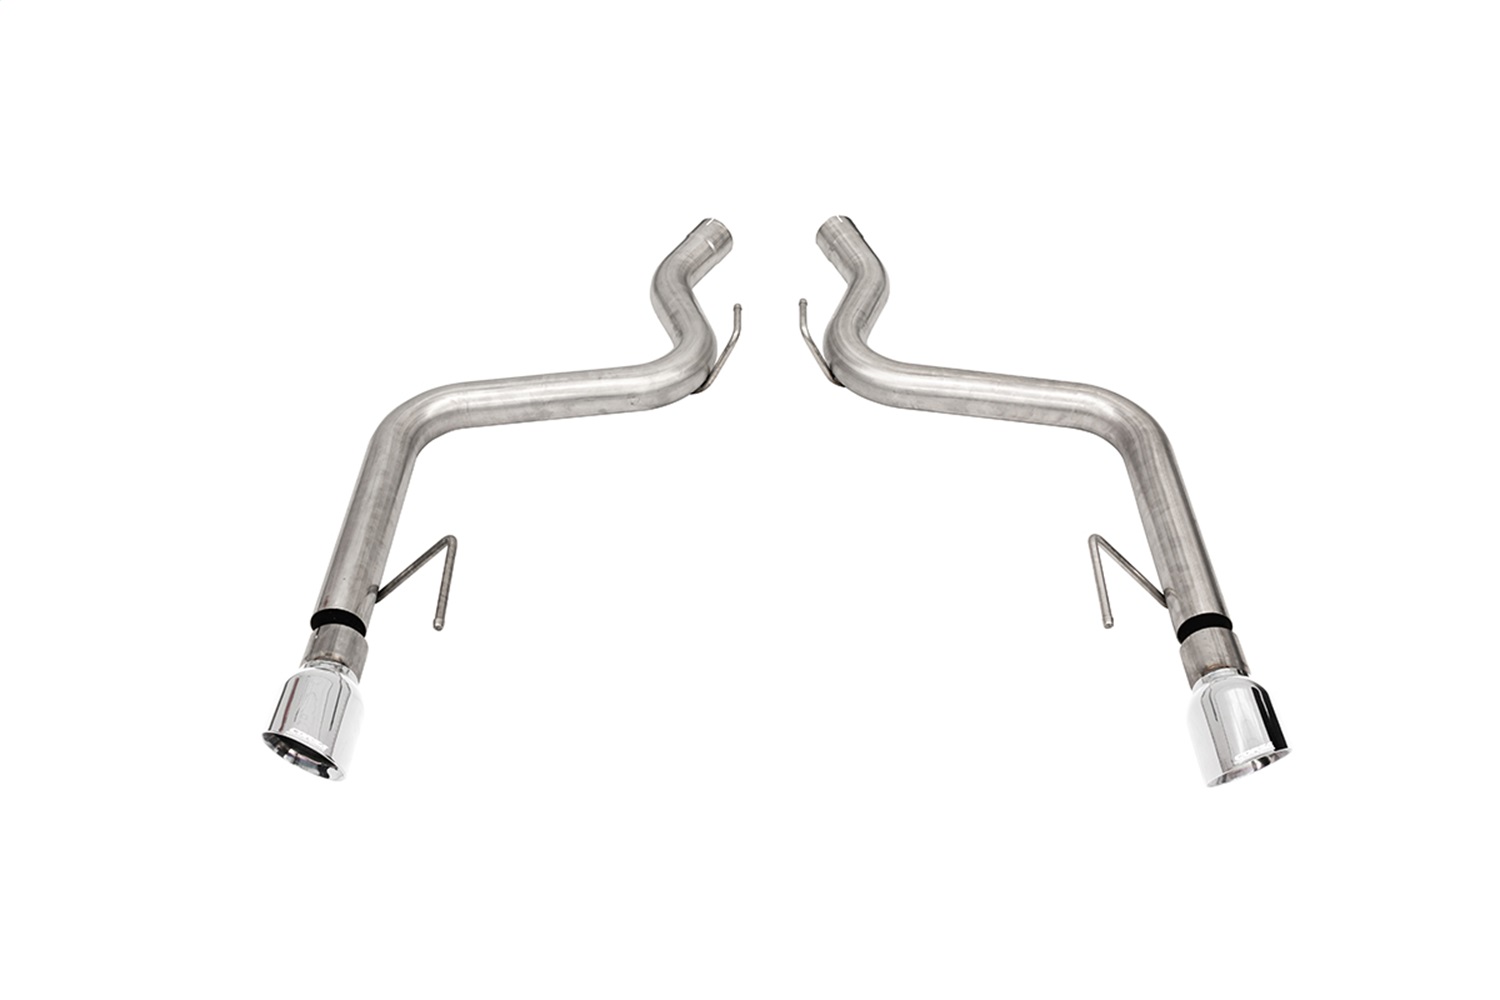 Corsa Performance 21086 Tack Axle-Back Exhaust System Fits 15-17 Mustang